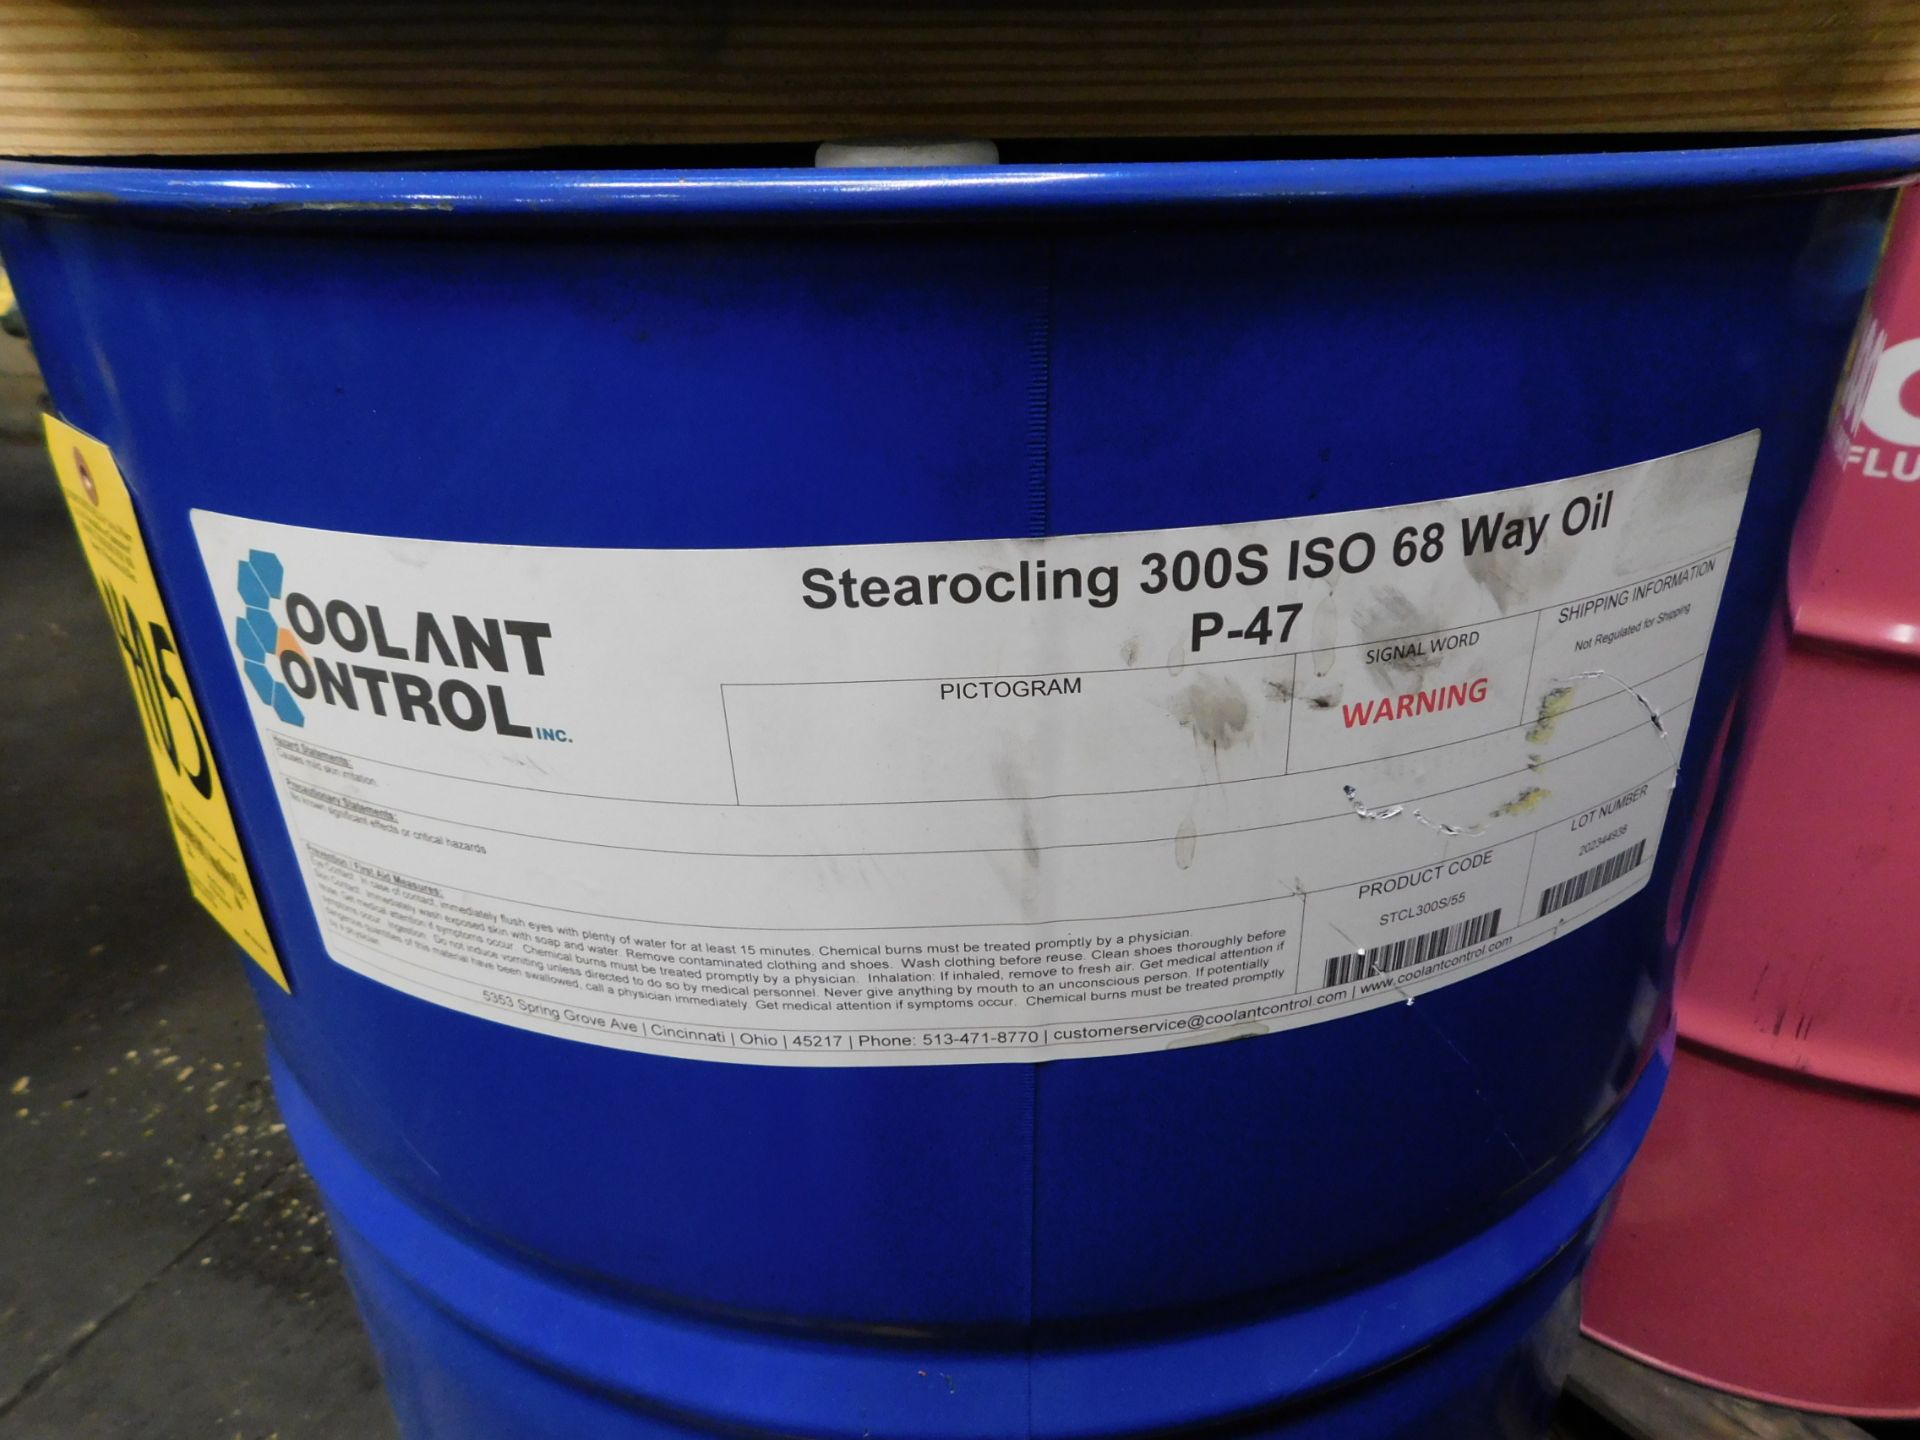 55 Gallon Drum with Stearocling 300S SIO 68 Way Lube Oil, NEW, FULL